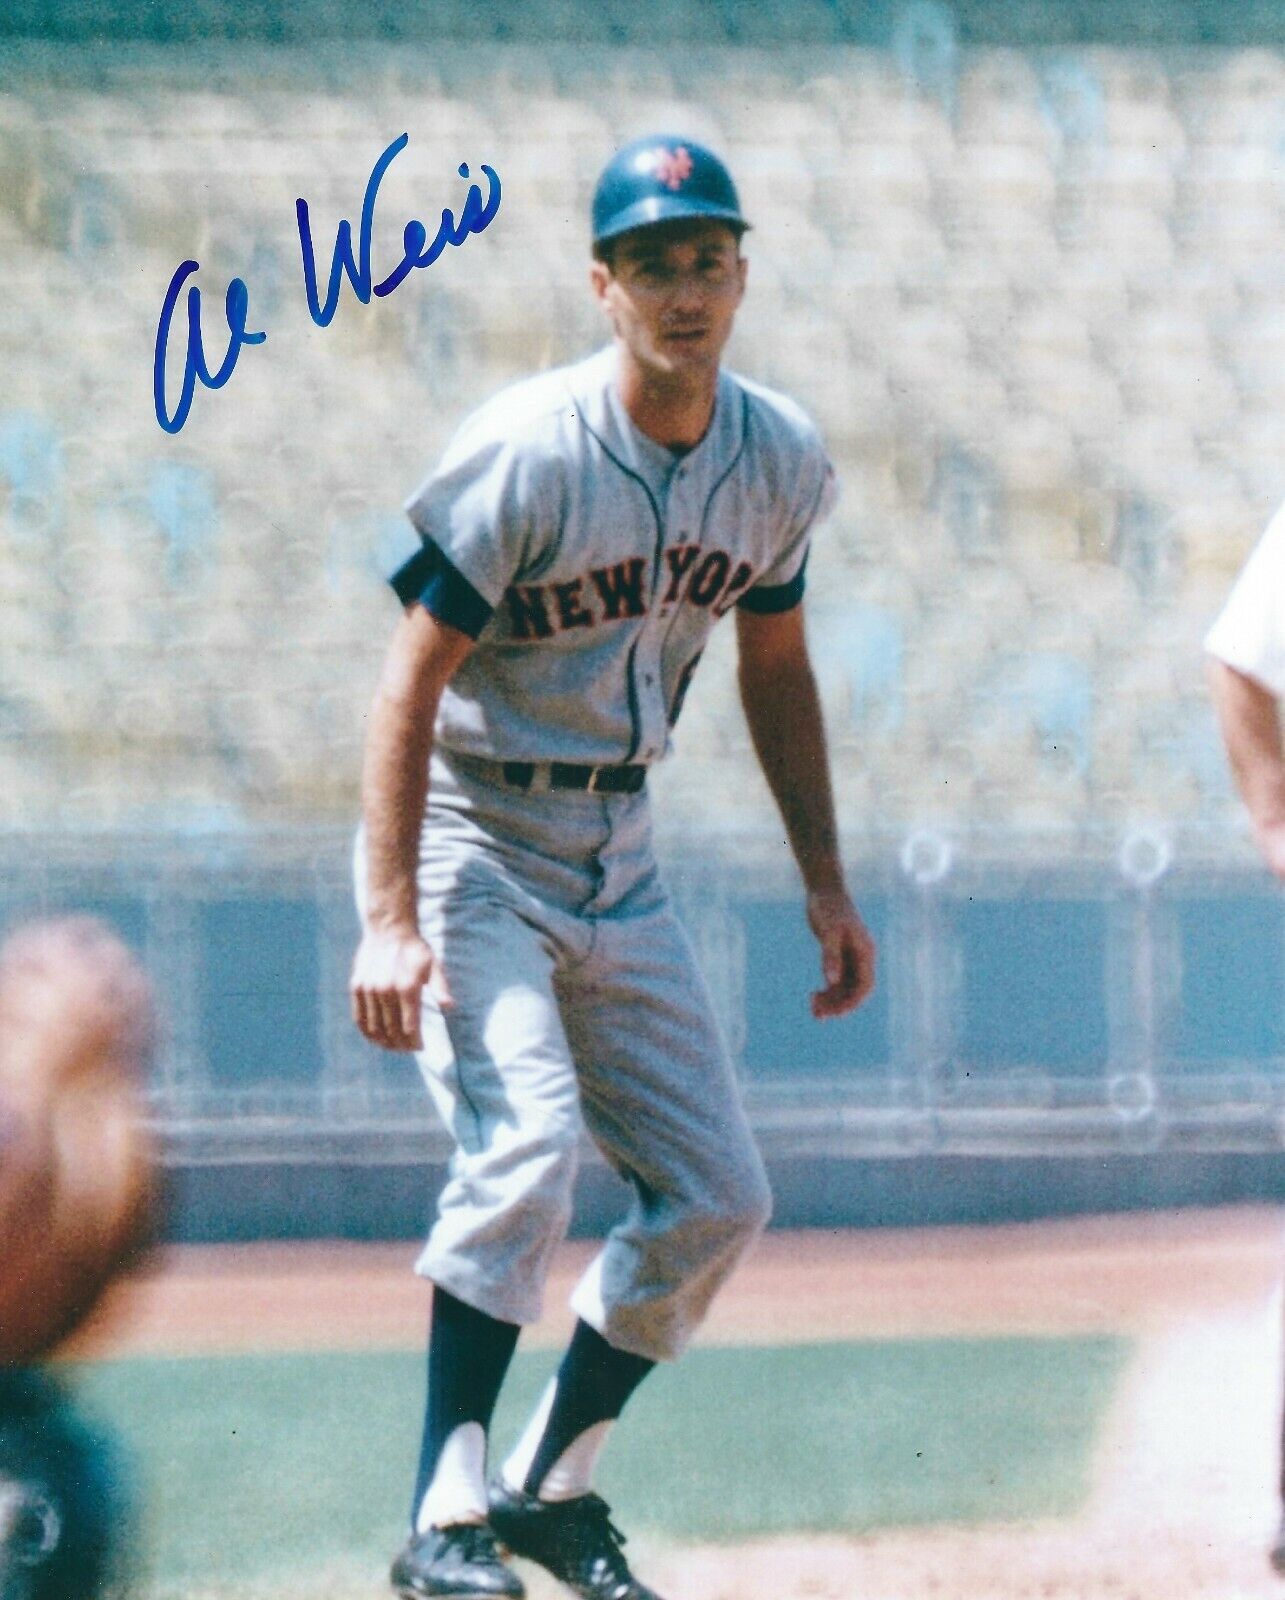 Signed 8x10 AL WEIS NEW YORK METS Autographed Photo Poster painting - COA